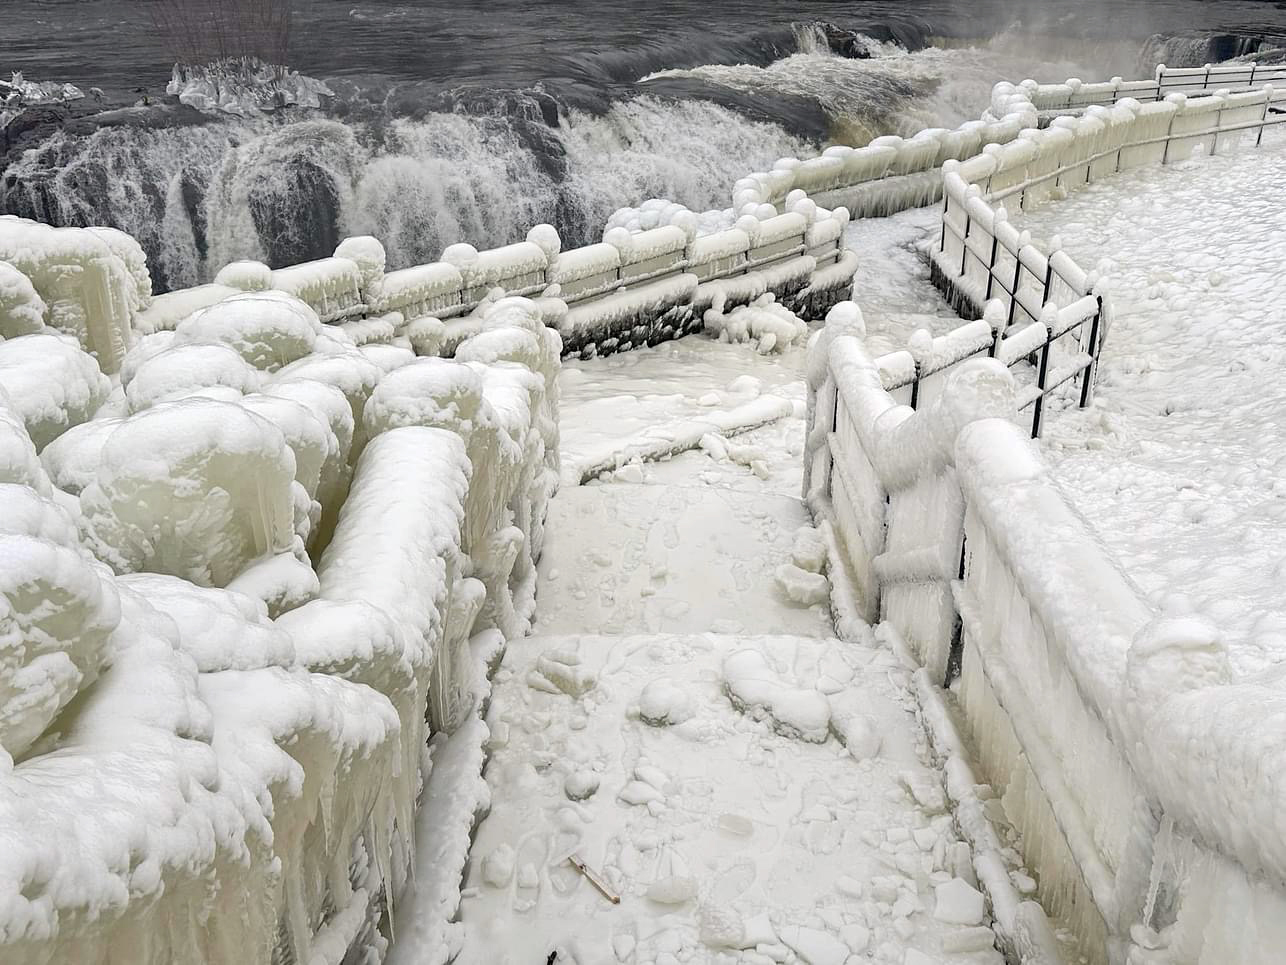 An ice-encased walkway and railings generated from spray from Great Falls (background) in Paterson (Passaic County) during the cold January outbreak (photo courtesy of Liz Reilly).